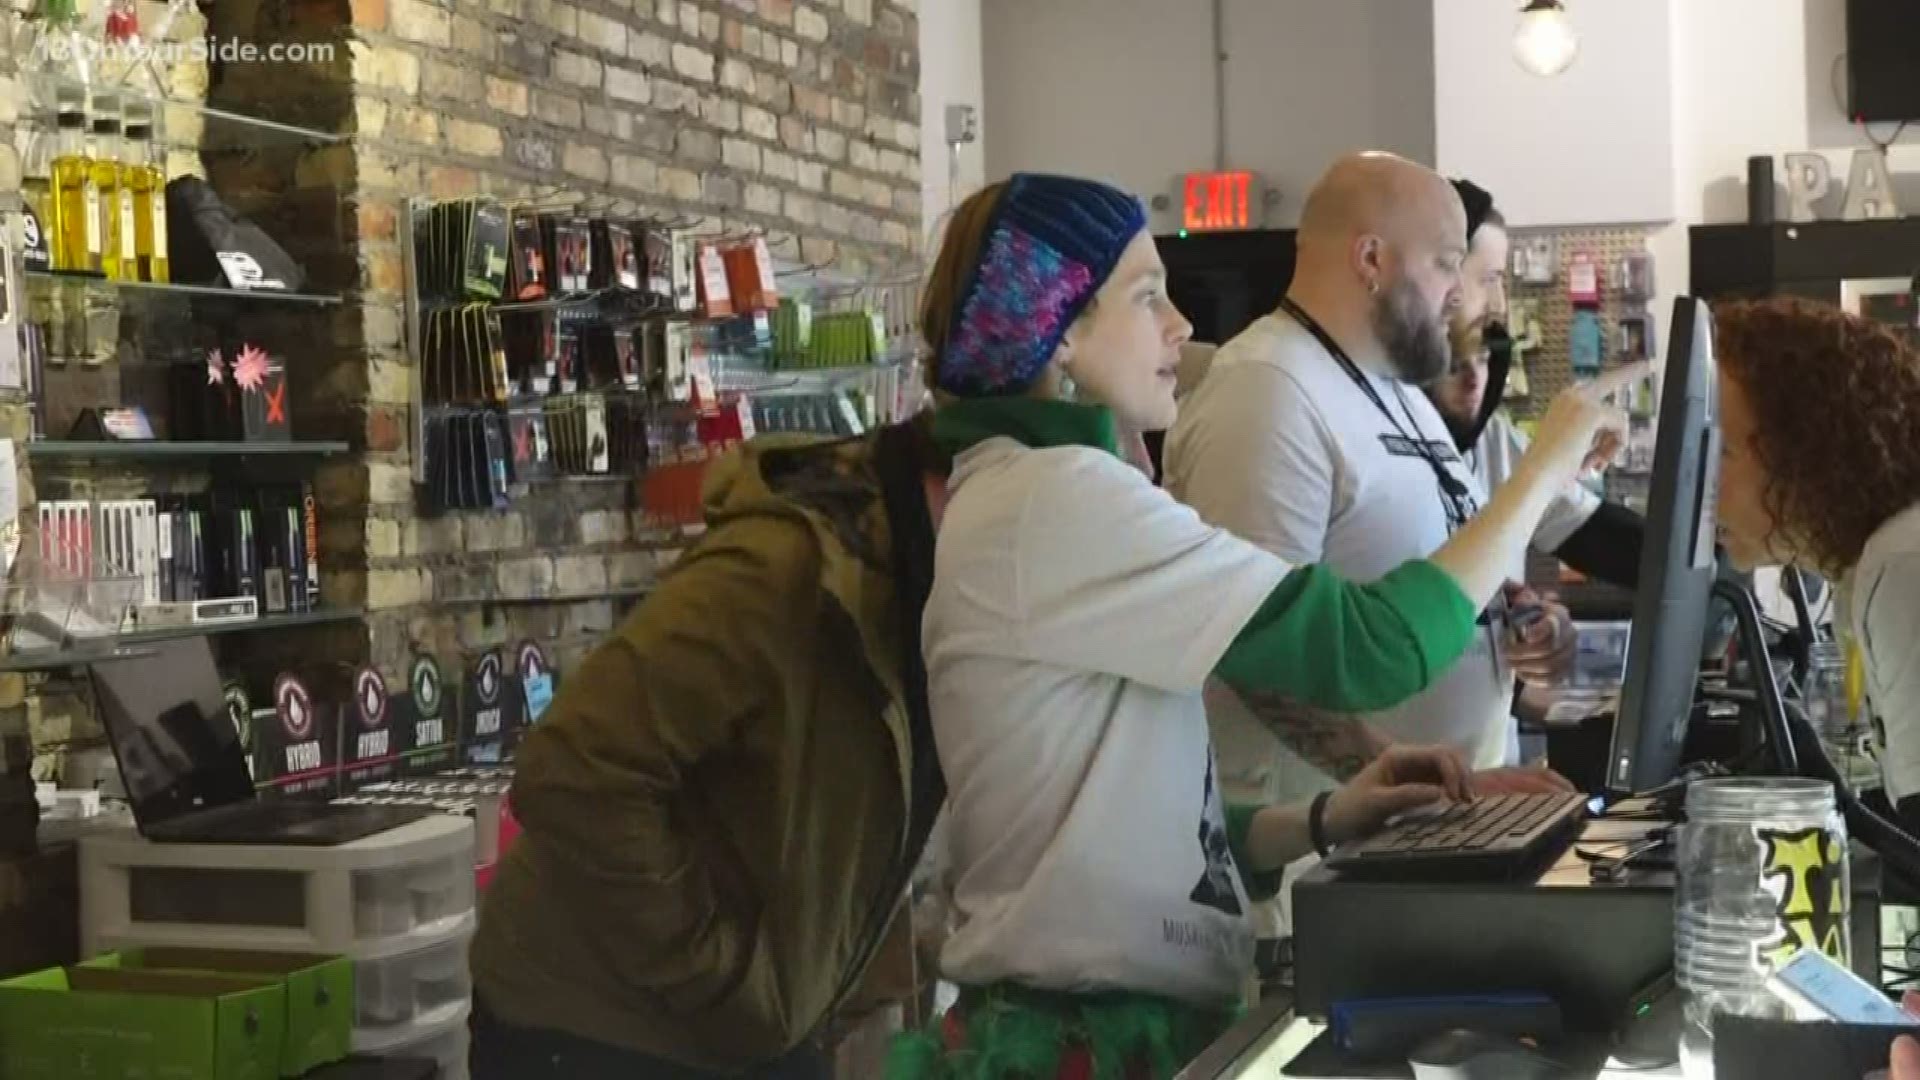 Park Place Provisionary is the first marijuana shop in West Michigan to start selling recreational pot.